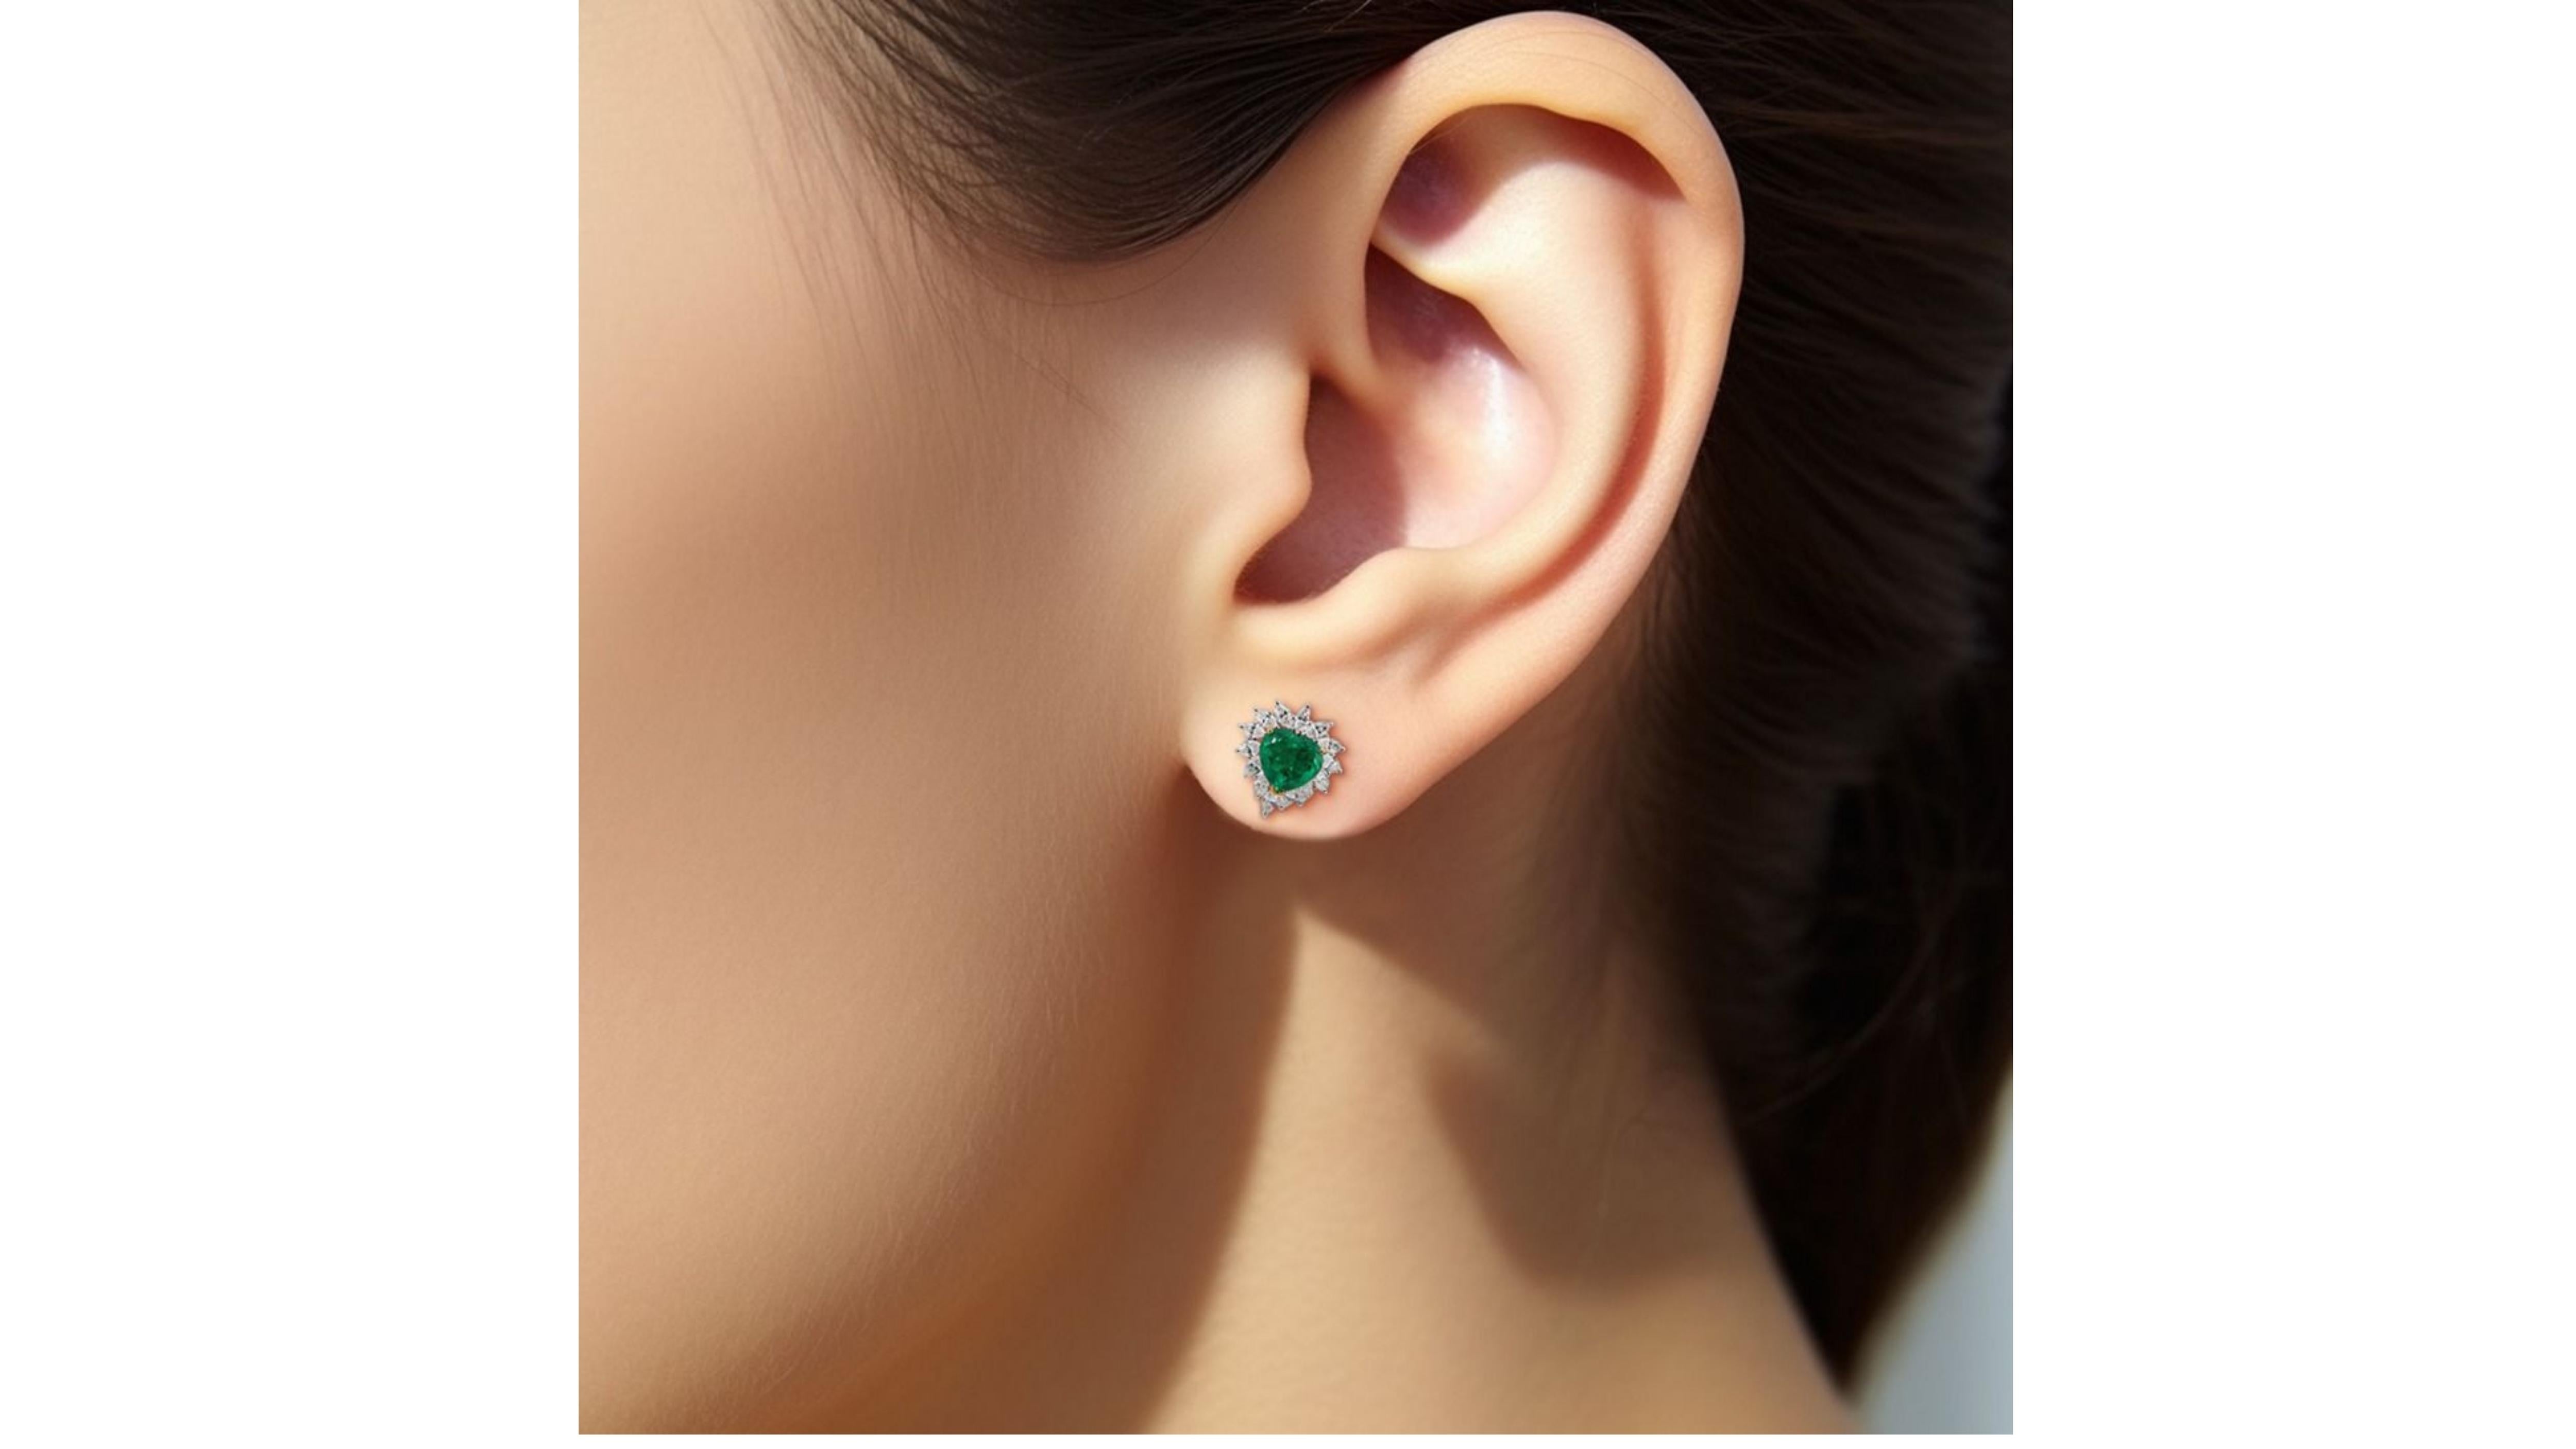 Main stone: Emeralds
cut: Heart Cut
Side Stone: Diamond
cut: Round cut
18k White Gold  

Package Contents:
~ Diamond Ring
~ Invoice 
~ Certificate * (if available)
~ Dianoche Jewellery Box

SKU: GMJ-003-Emerald Earrings